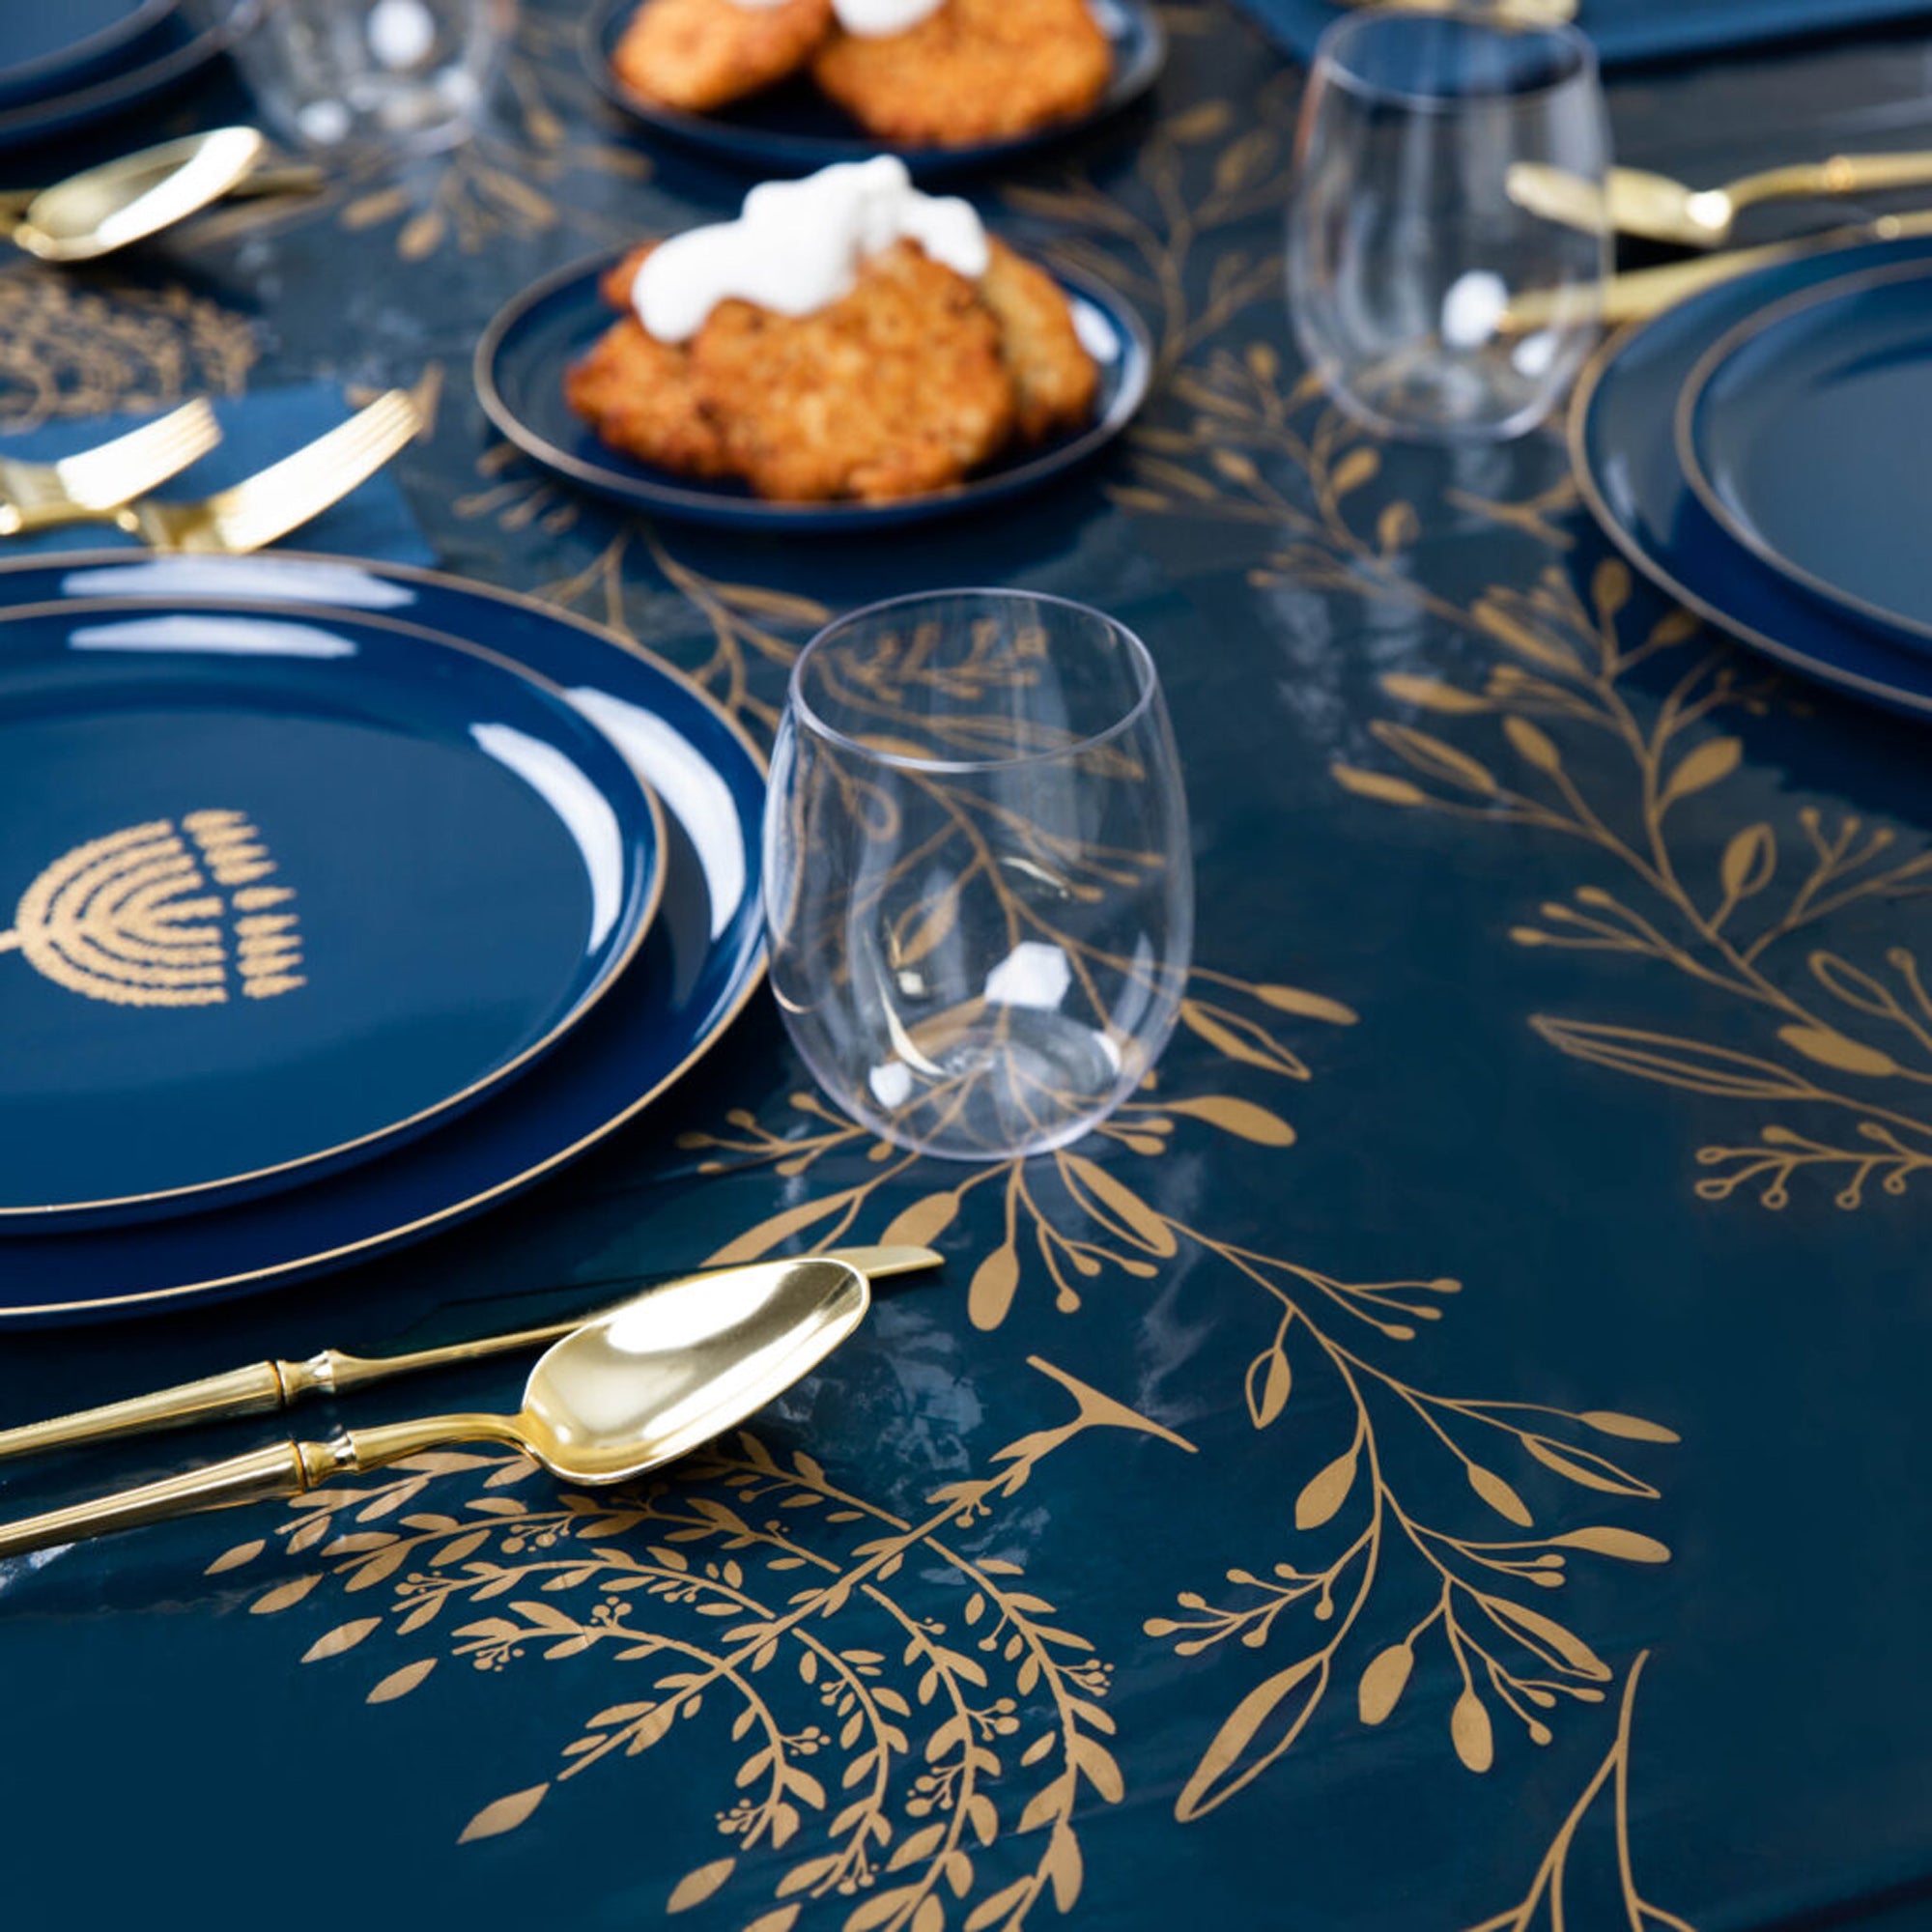 Chanukah Table Cover Blue/Gold 54″x108″